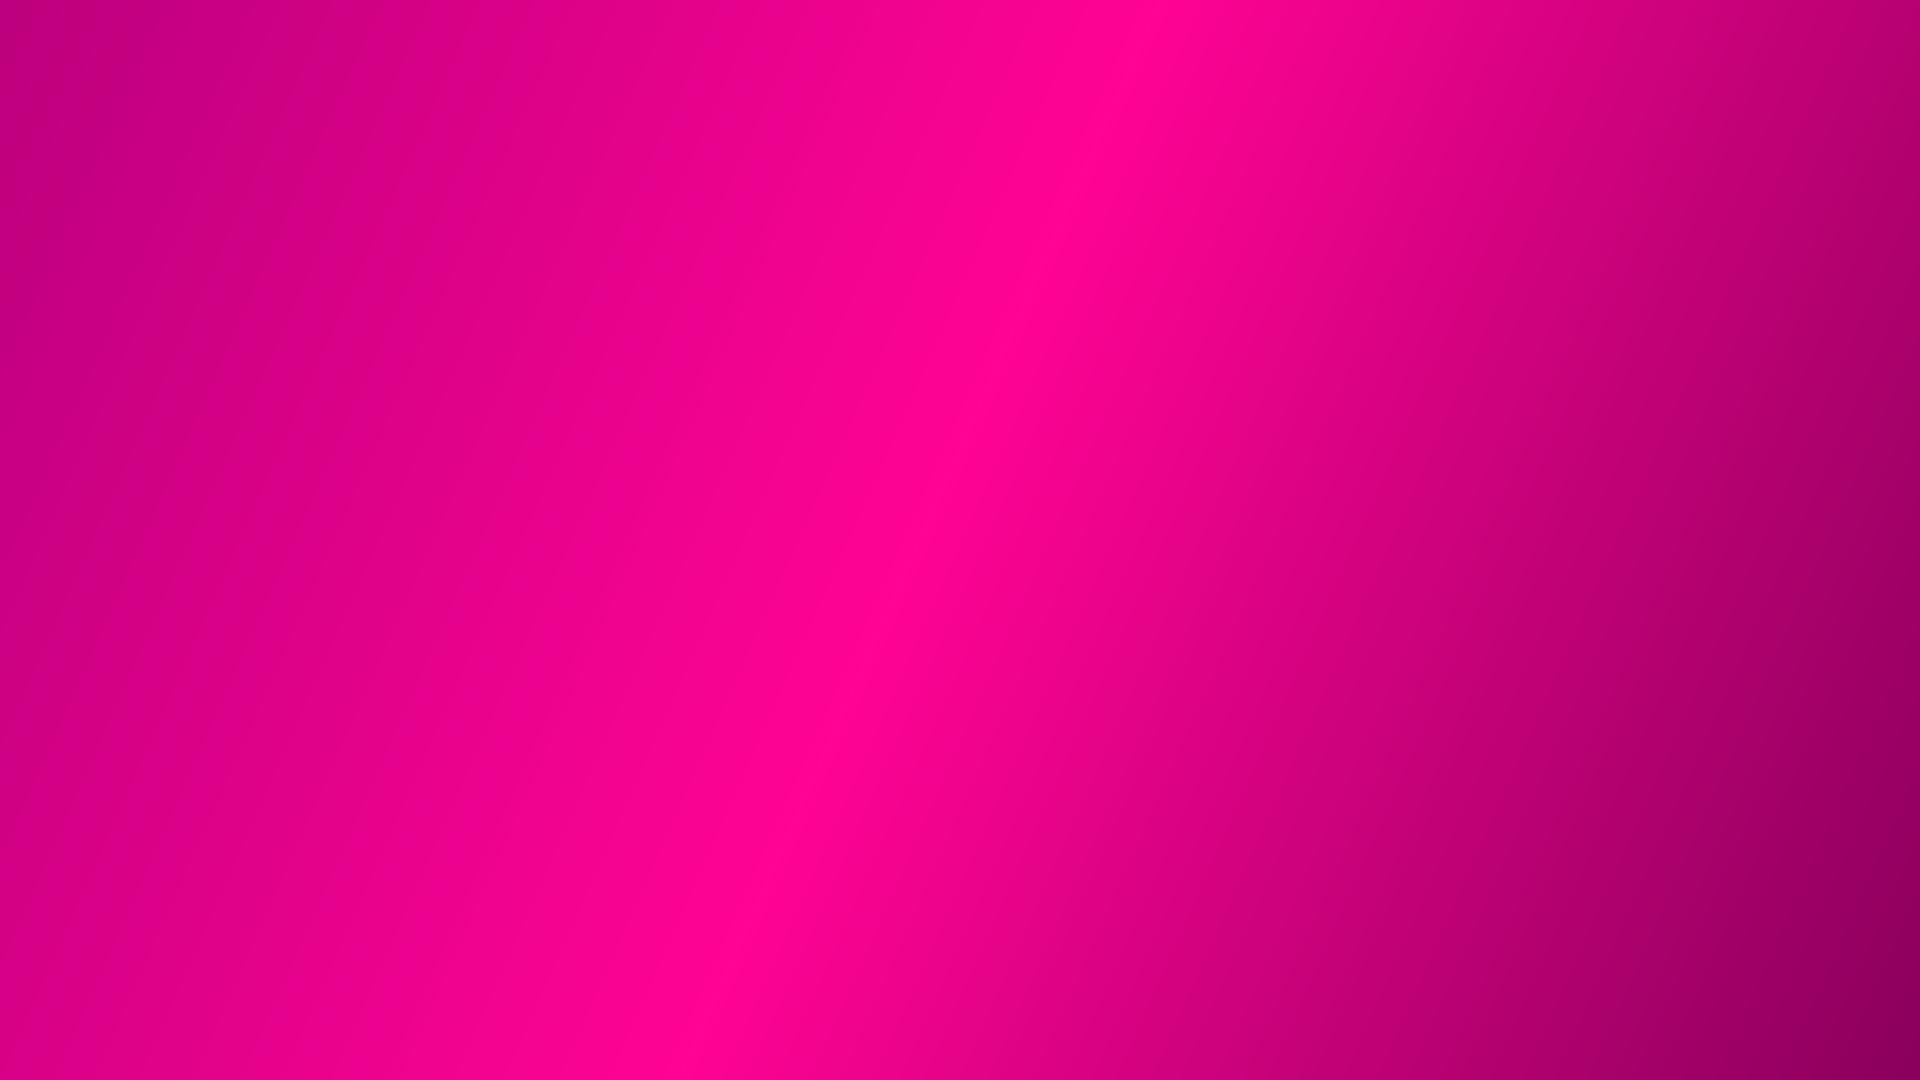 The Pink Wall Gradient